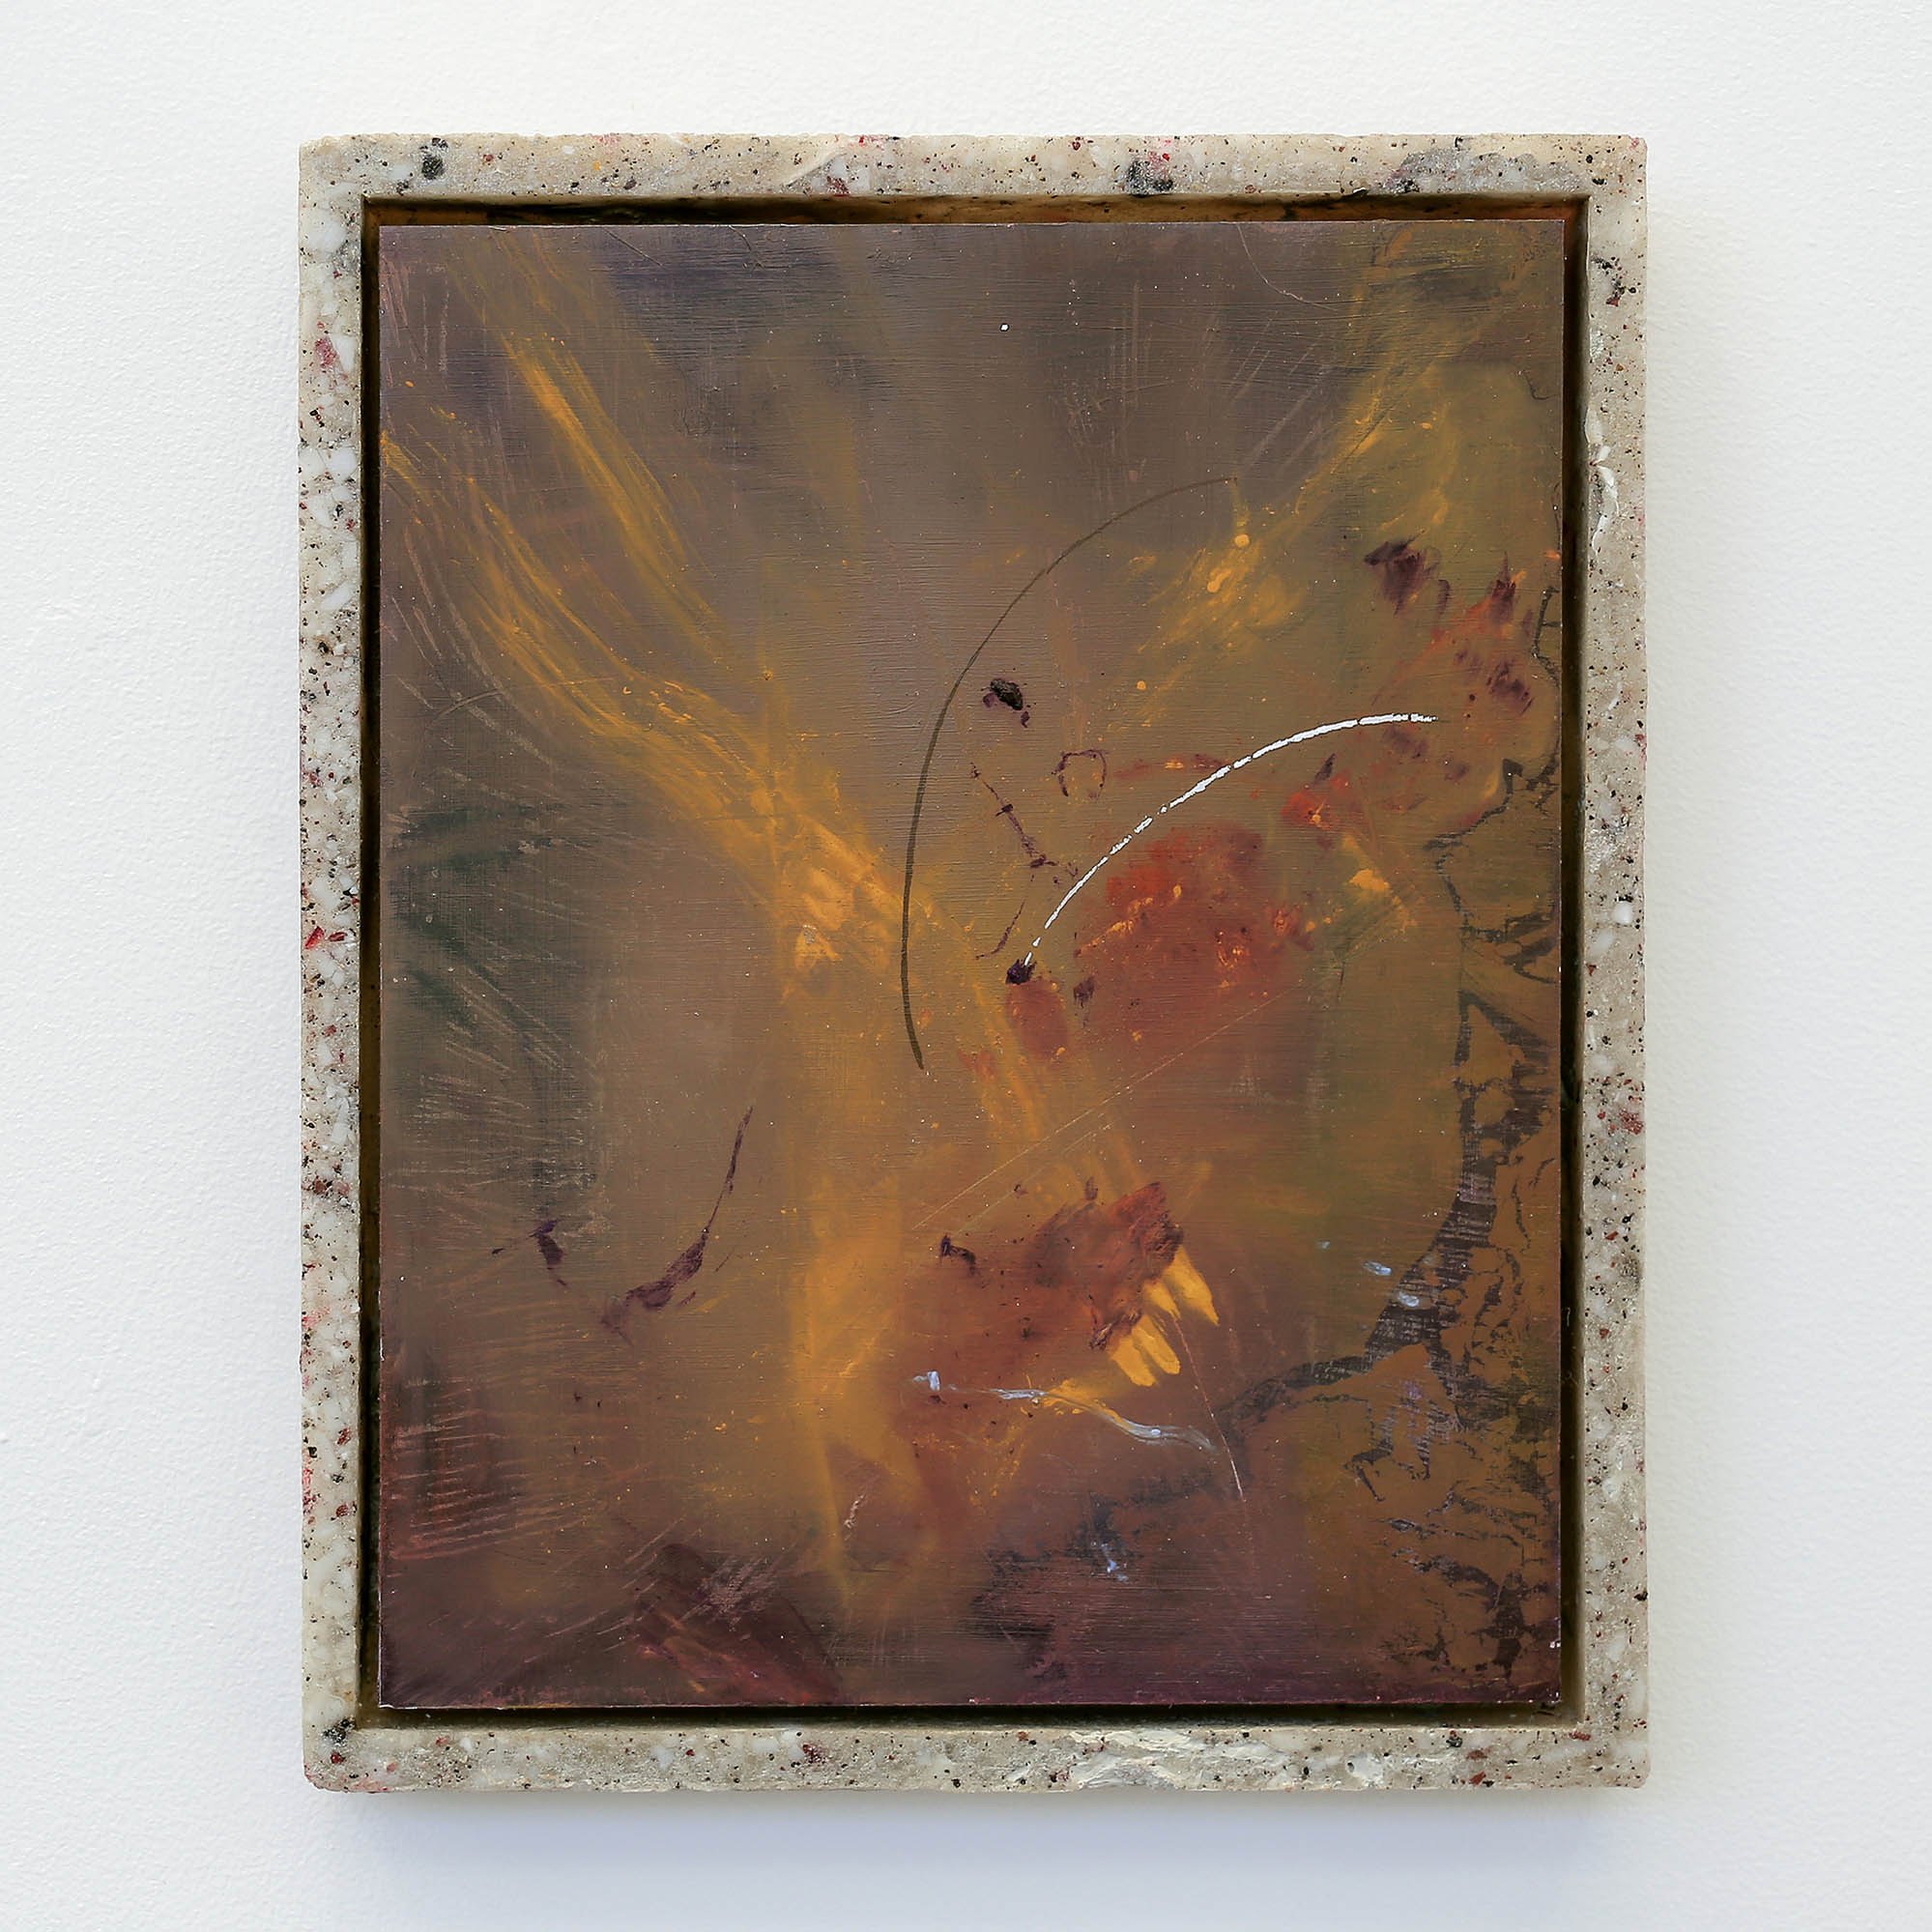  Chime II, 2023, oil on aluminium, resin, glass and acrylic frame, 290 x 230  Photo credit: Vicki Piper 